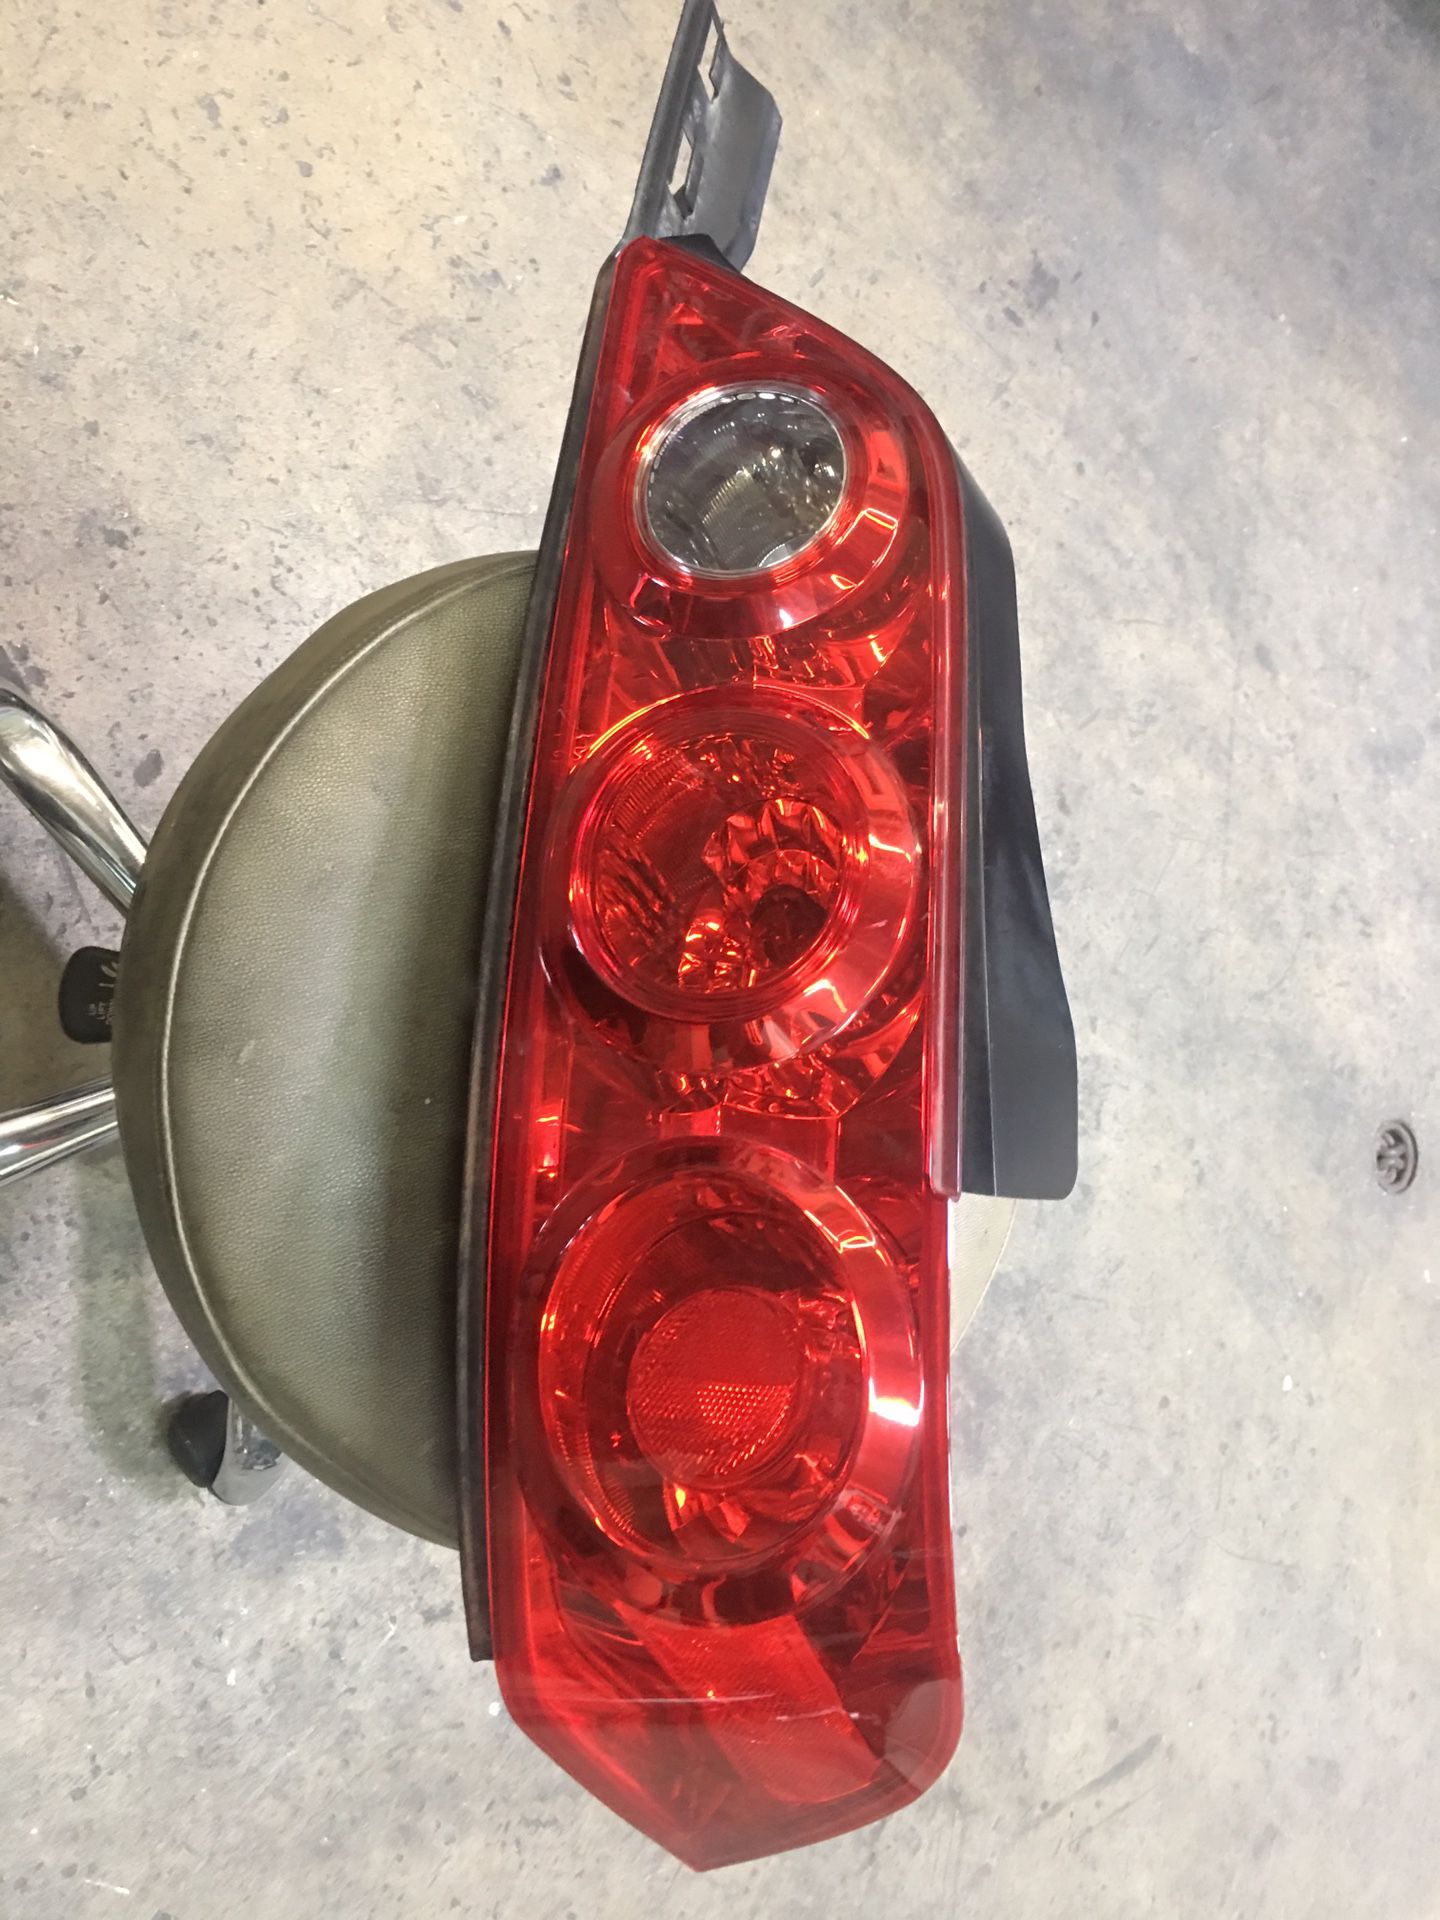 2005-2006 ACURA RSX OEM RIGHT TAIL LIGHT, PASSENGER SIDE. ACURA RSX PART.